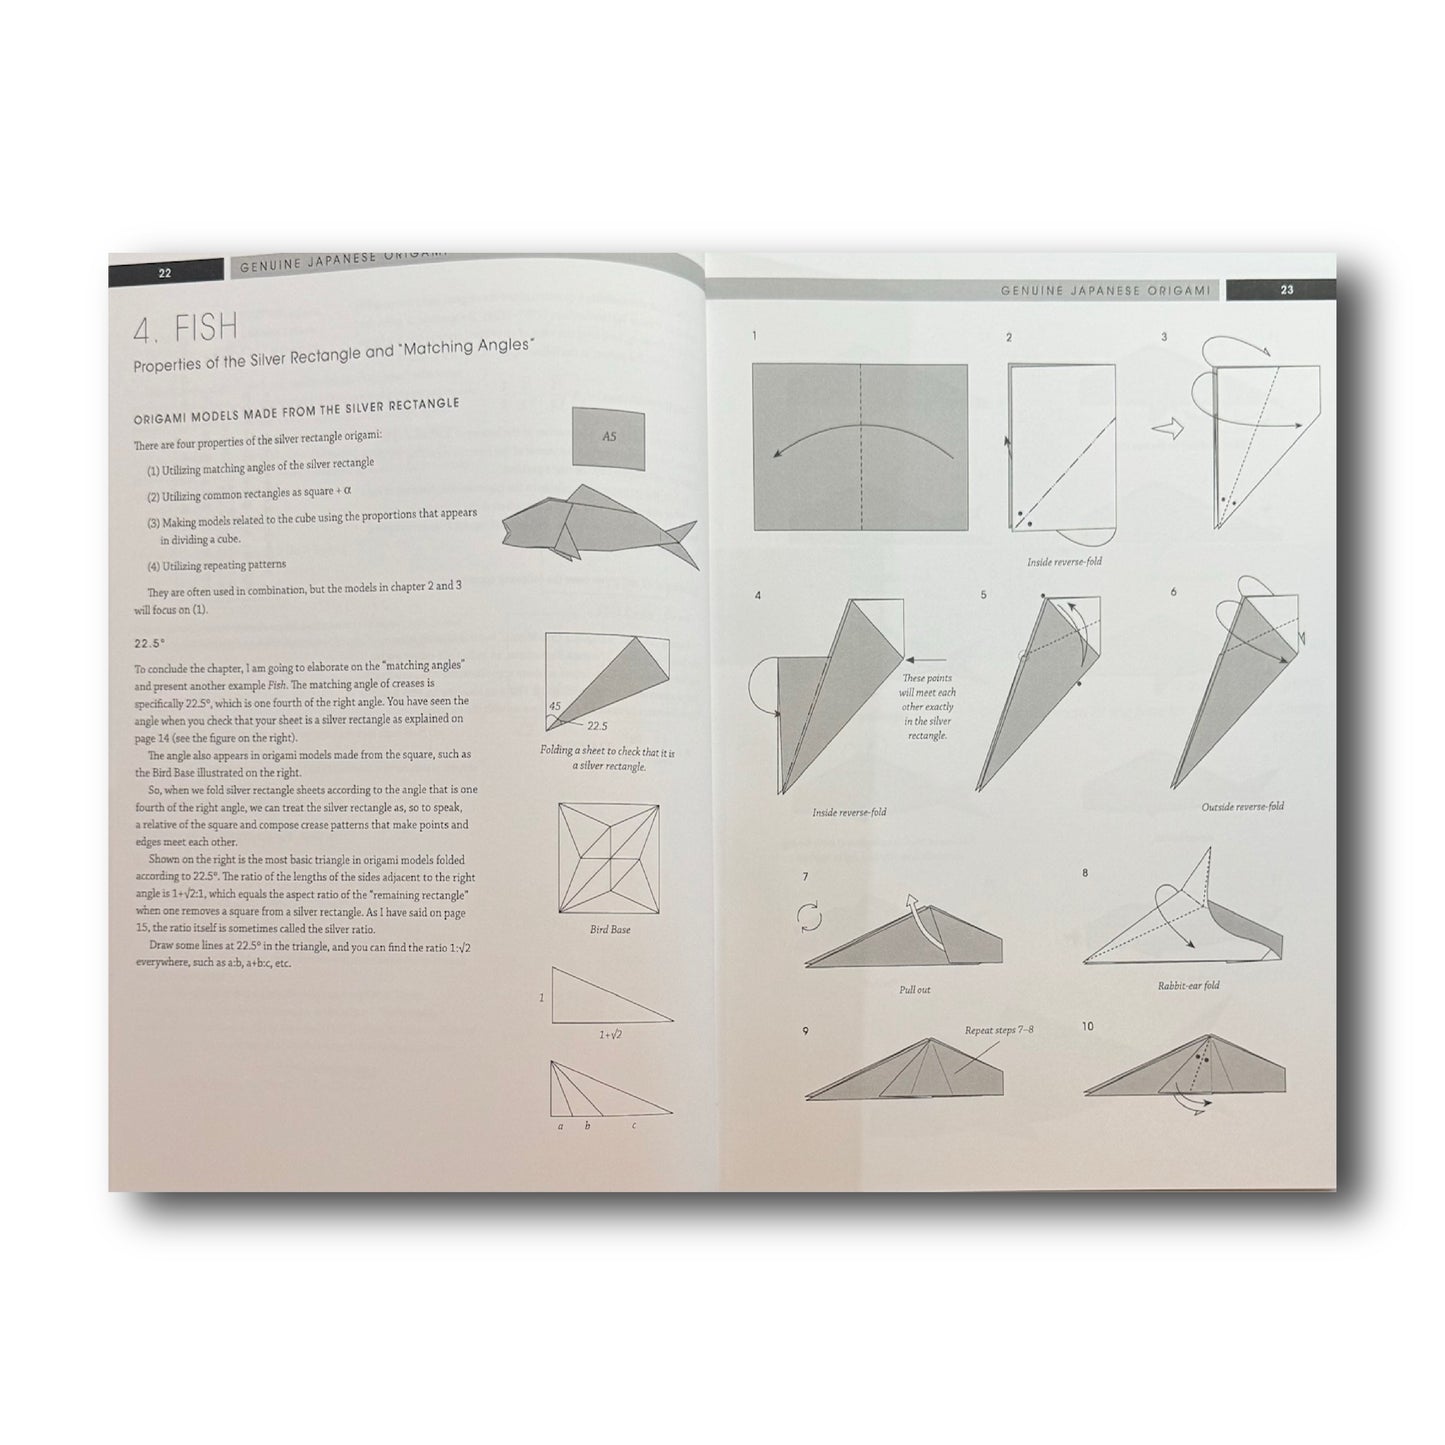 Genuine Japanese Origami, Book 1: 33 Mathematical Models Based Upon (the square root of) 2